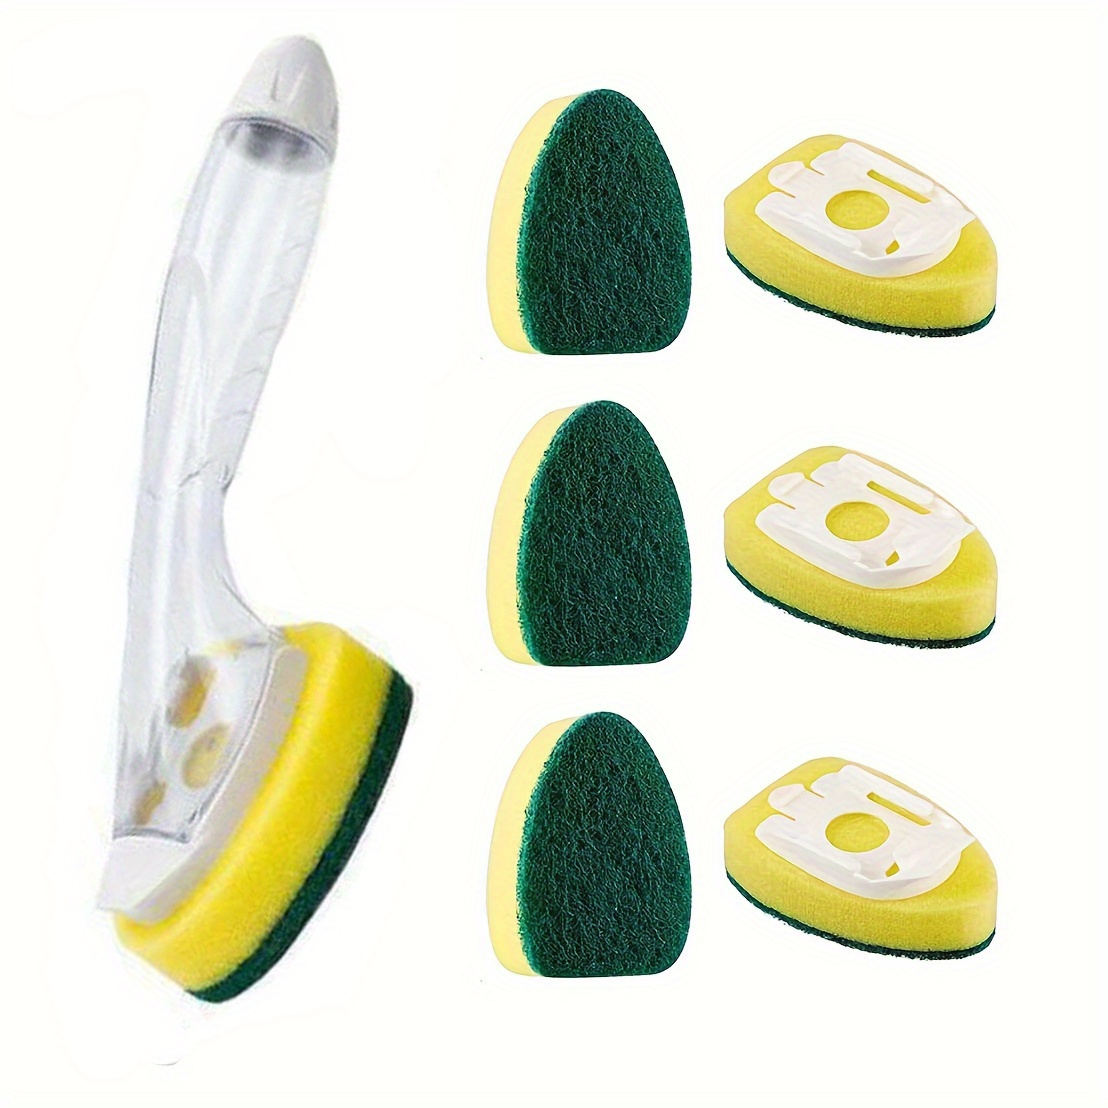 Dish Wand Refills Sponge Heads Brush Replacement Sponge Refill Sponge Pads  for Kitchen Cleaning Sponges 